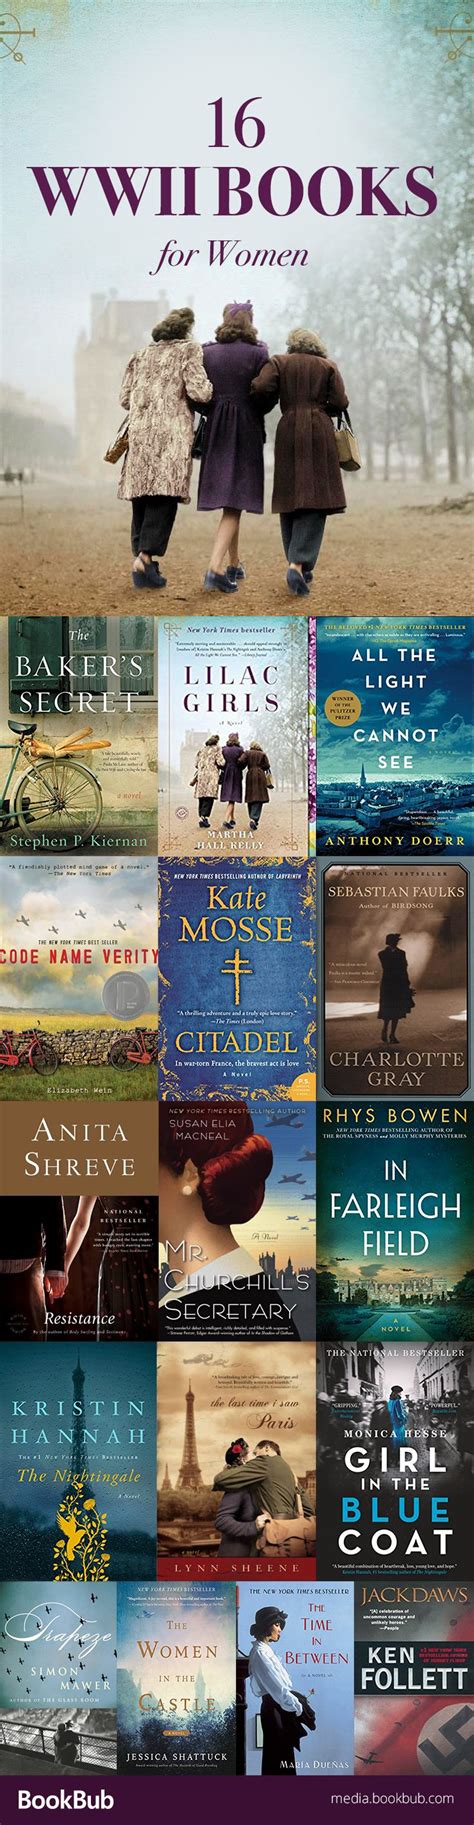 16 world war ii books for women if you love history books these wwii novels are worth reading